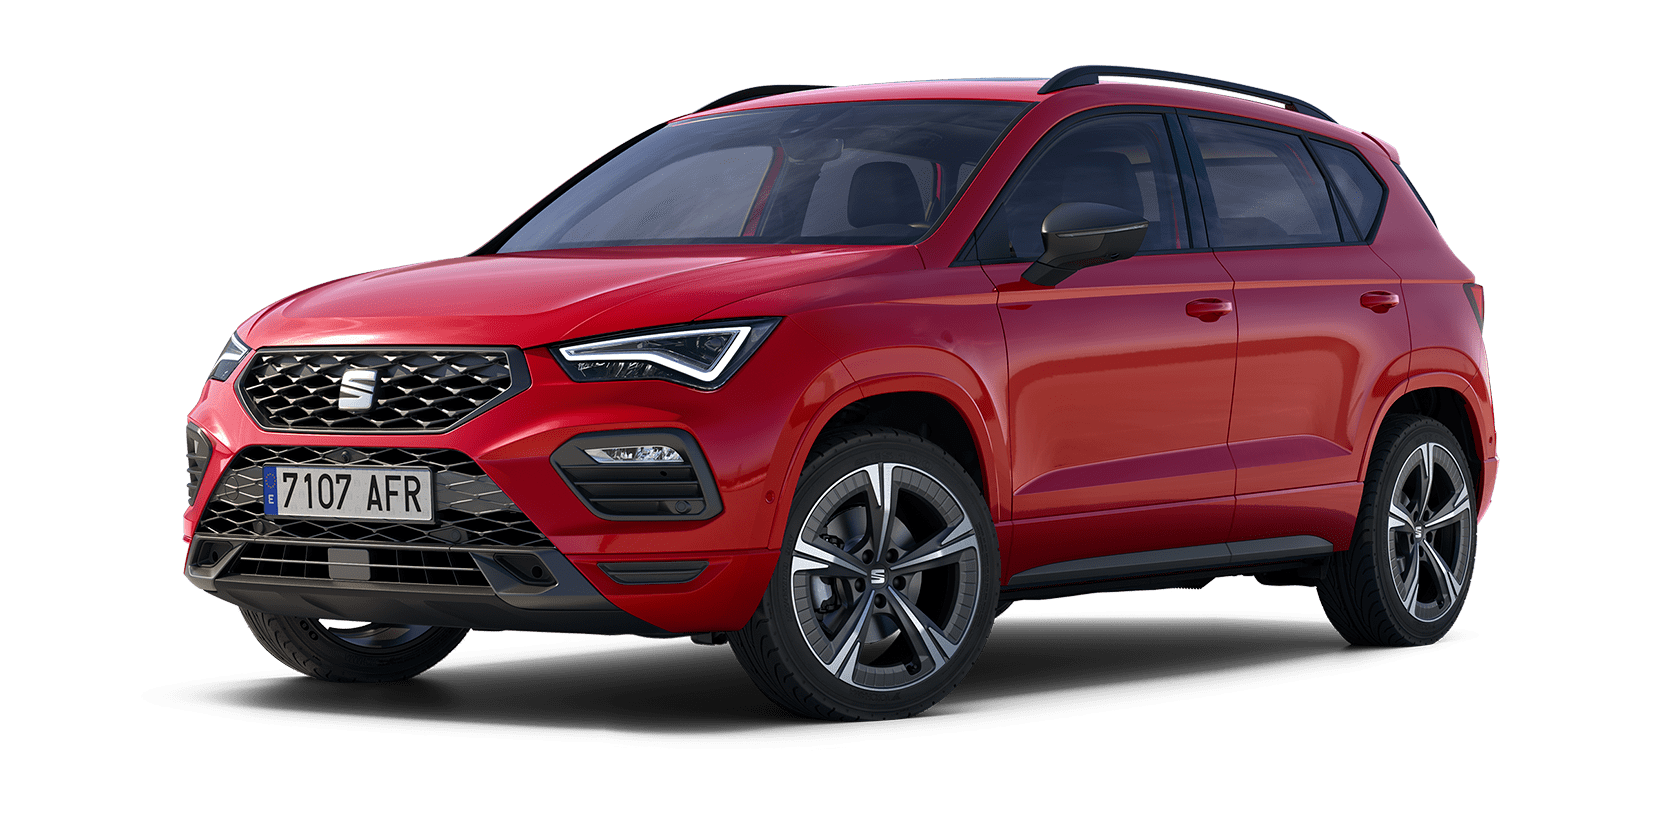 SEAT Ateca FR velvet red colour with machined alloy wheels